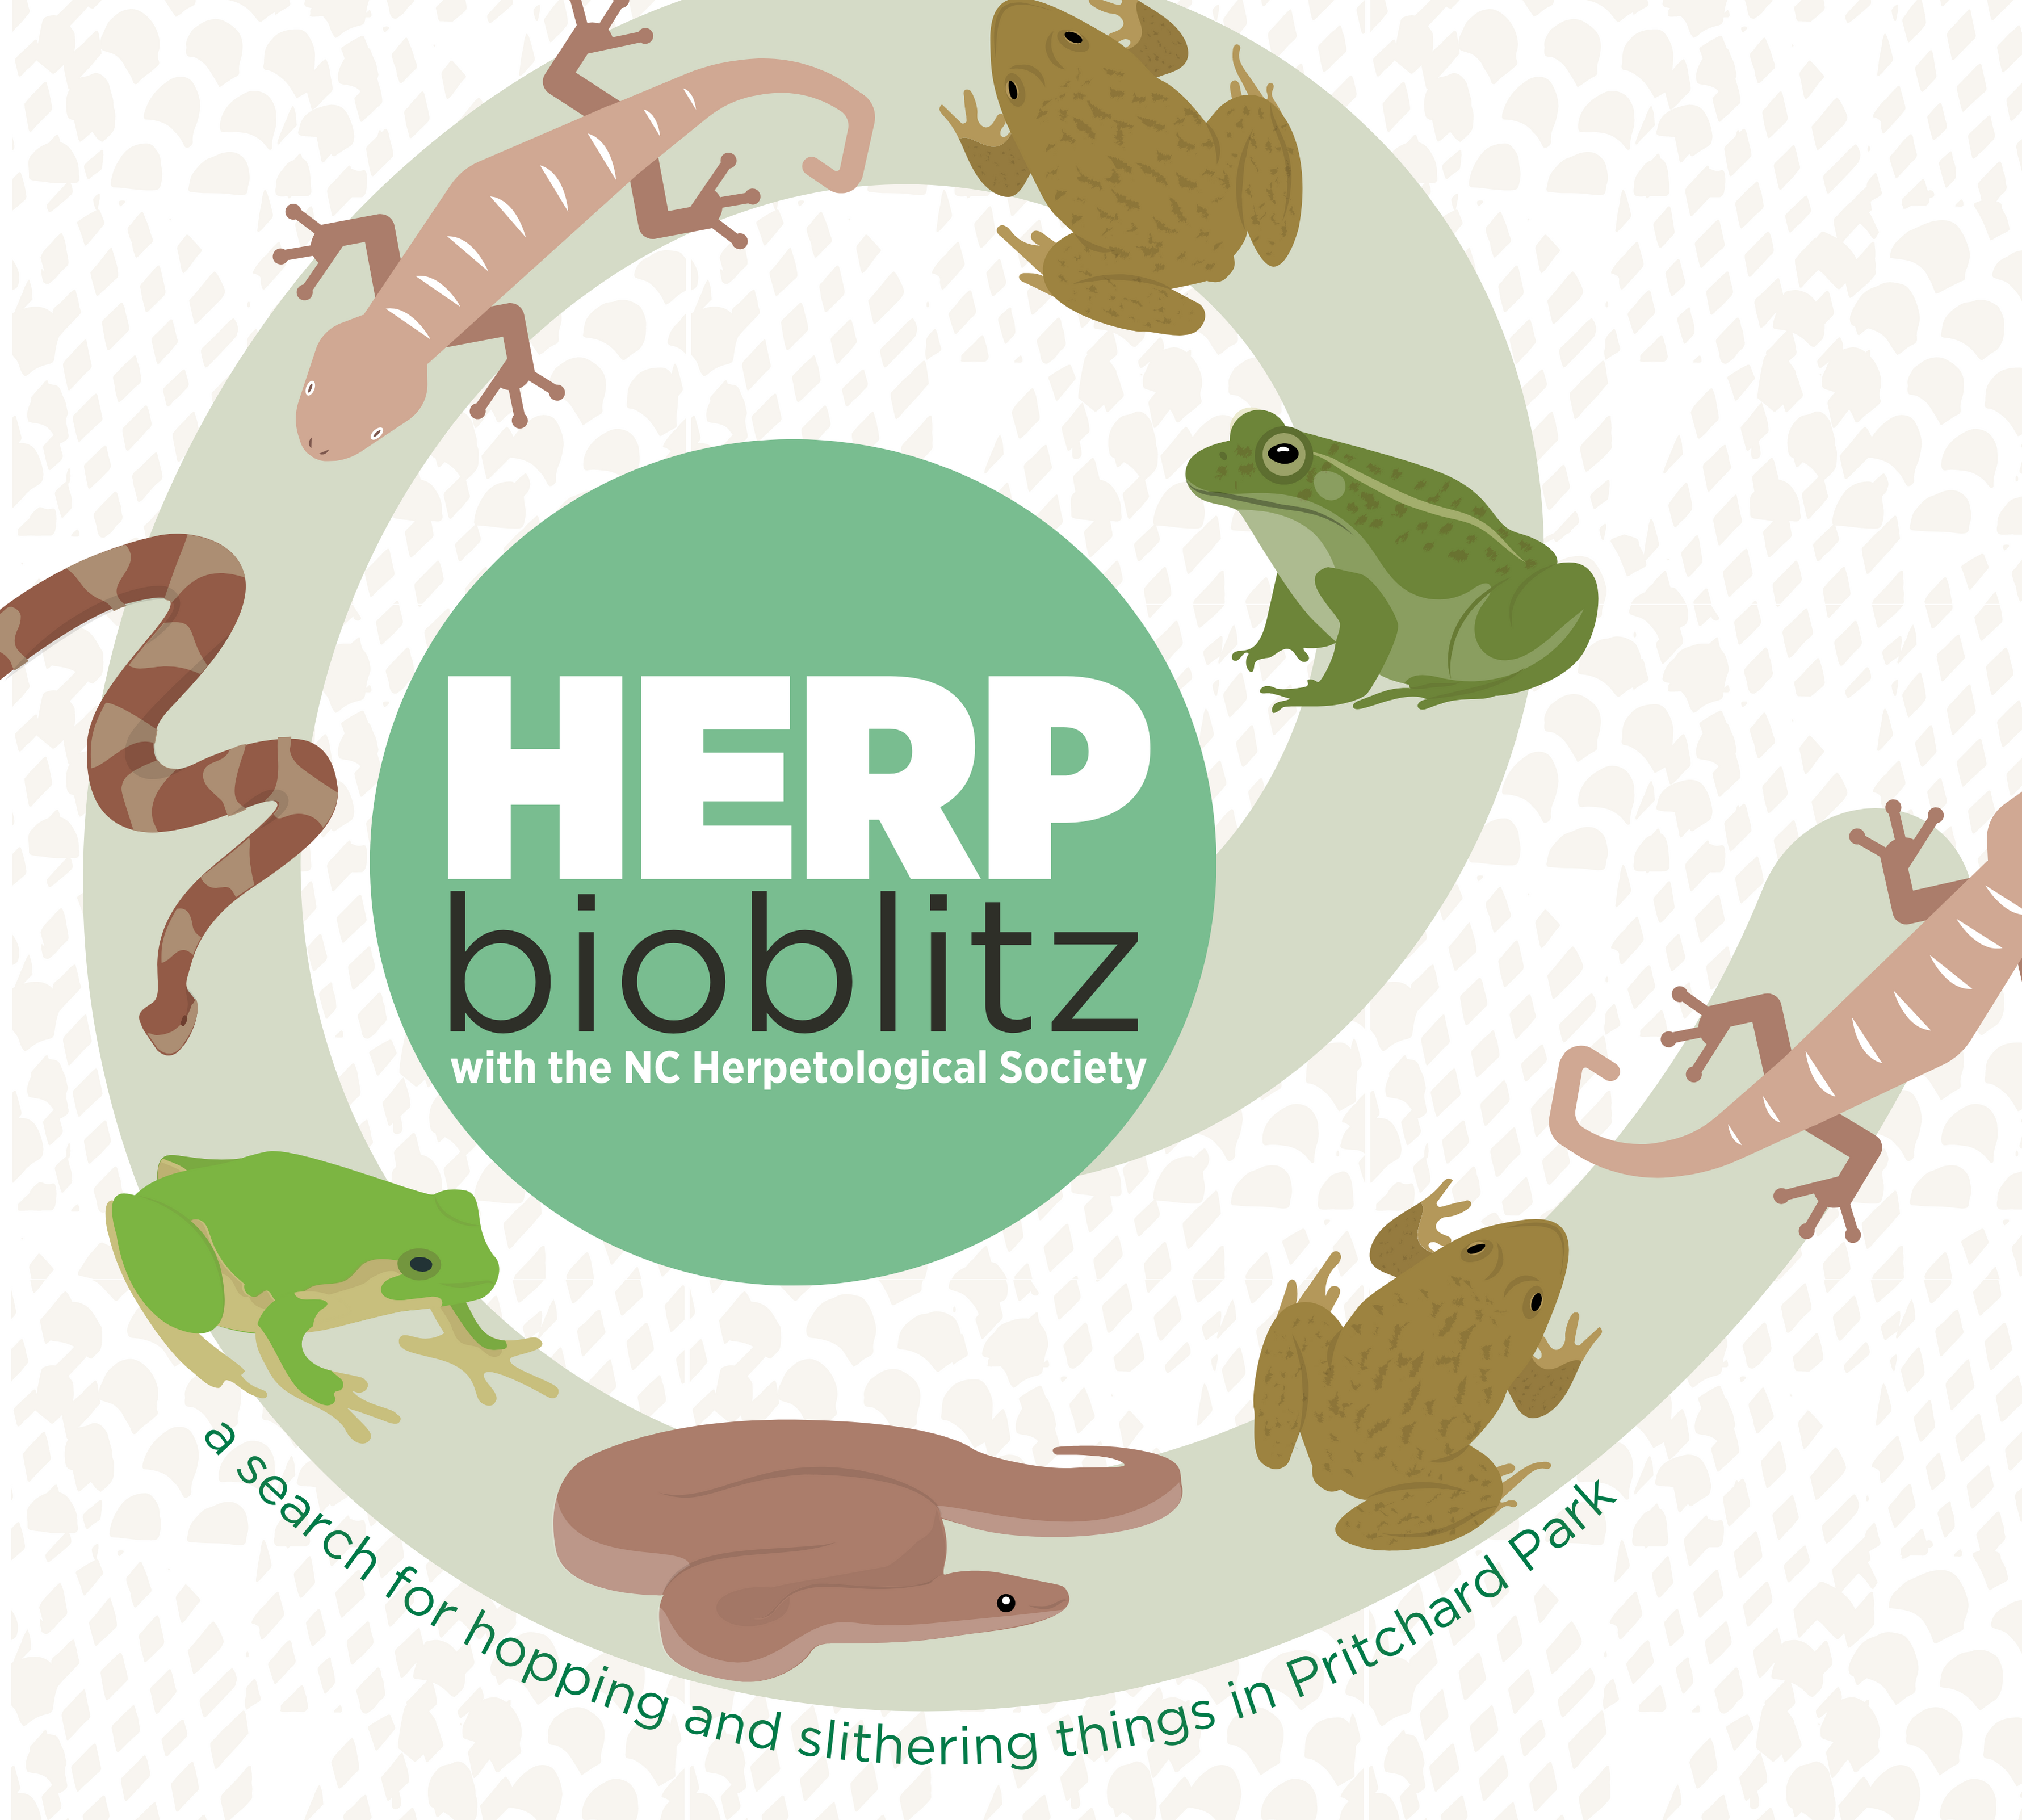 herp bioblitz with images of snakes and frogs